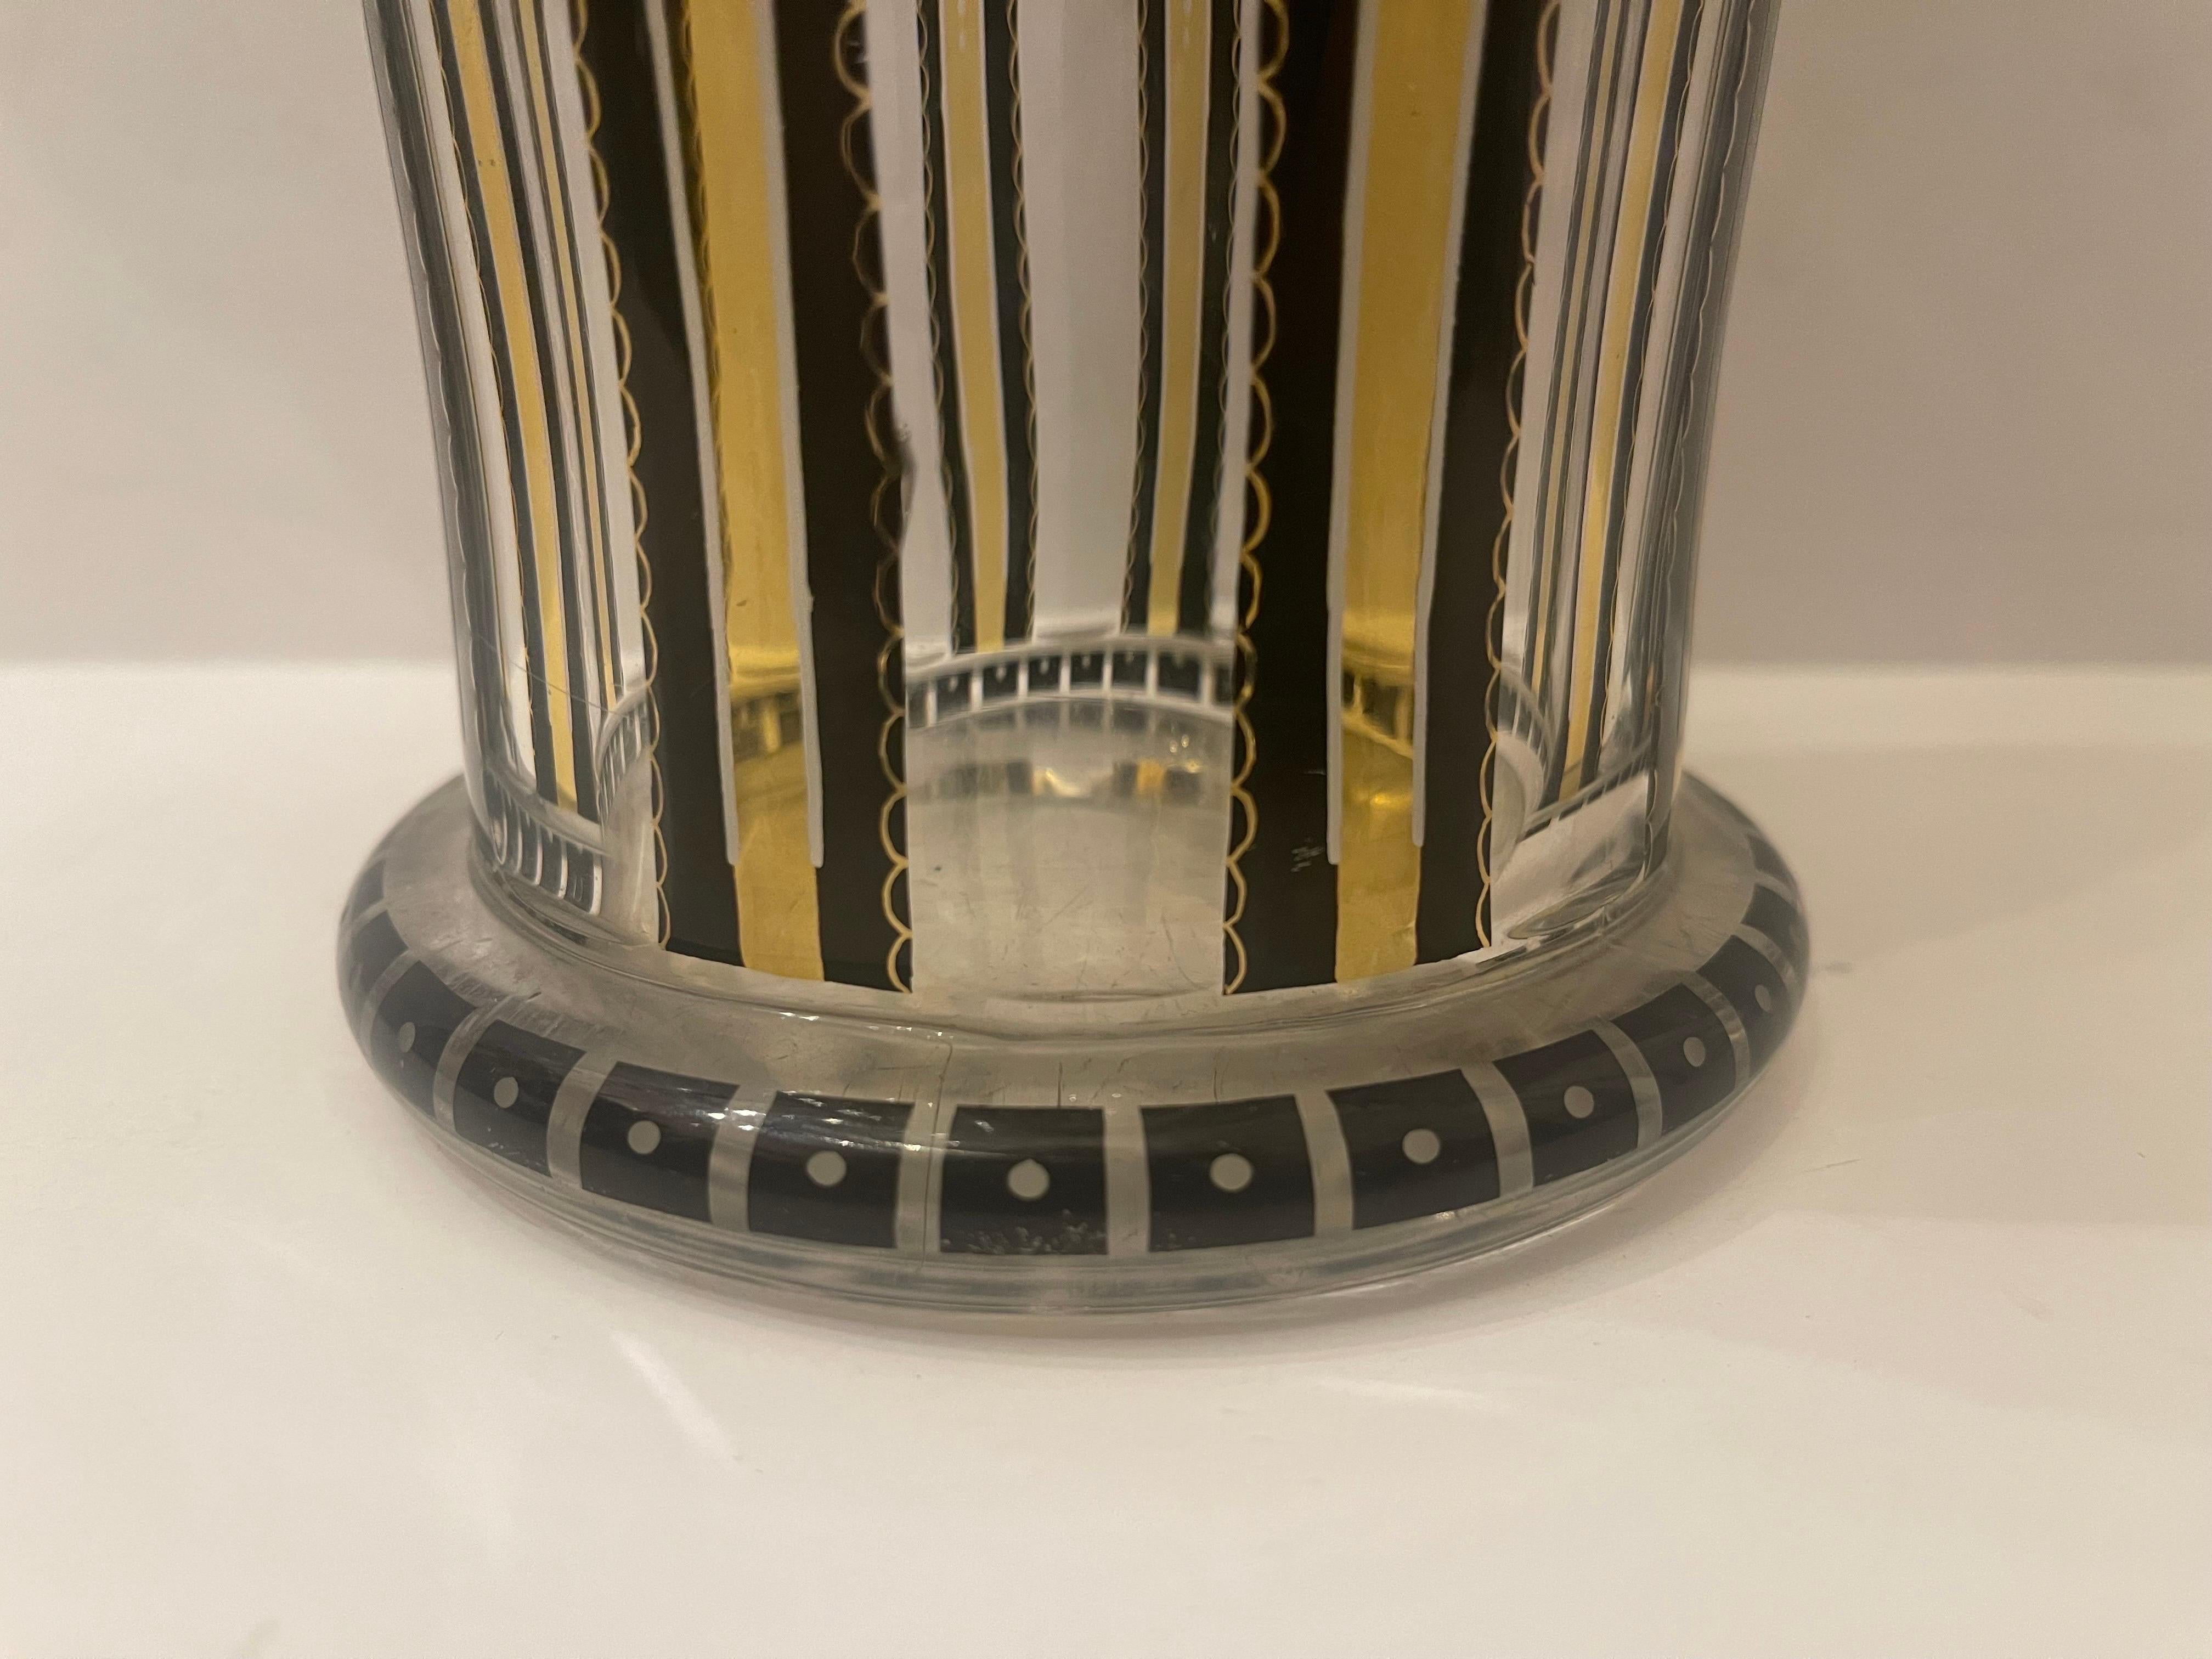 A Wonderful Moser Style Art Glass In The Art Deco Style Enameled Yellow & Black With Etched Crystal Large Vase 
Minor Scratches Consistent With Age And Use.